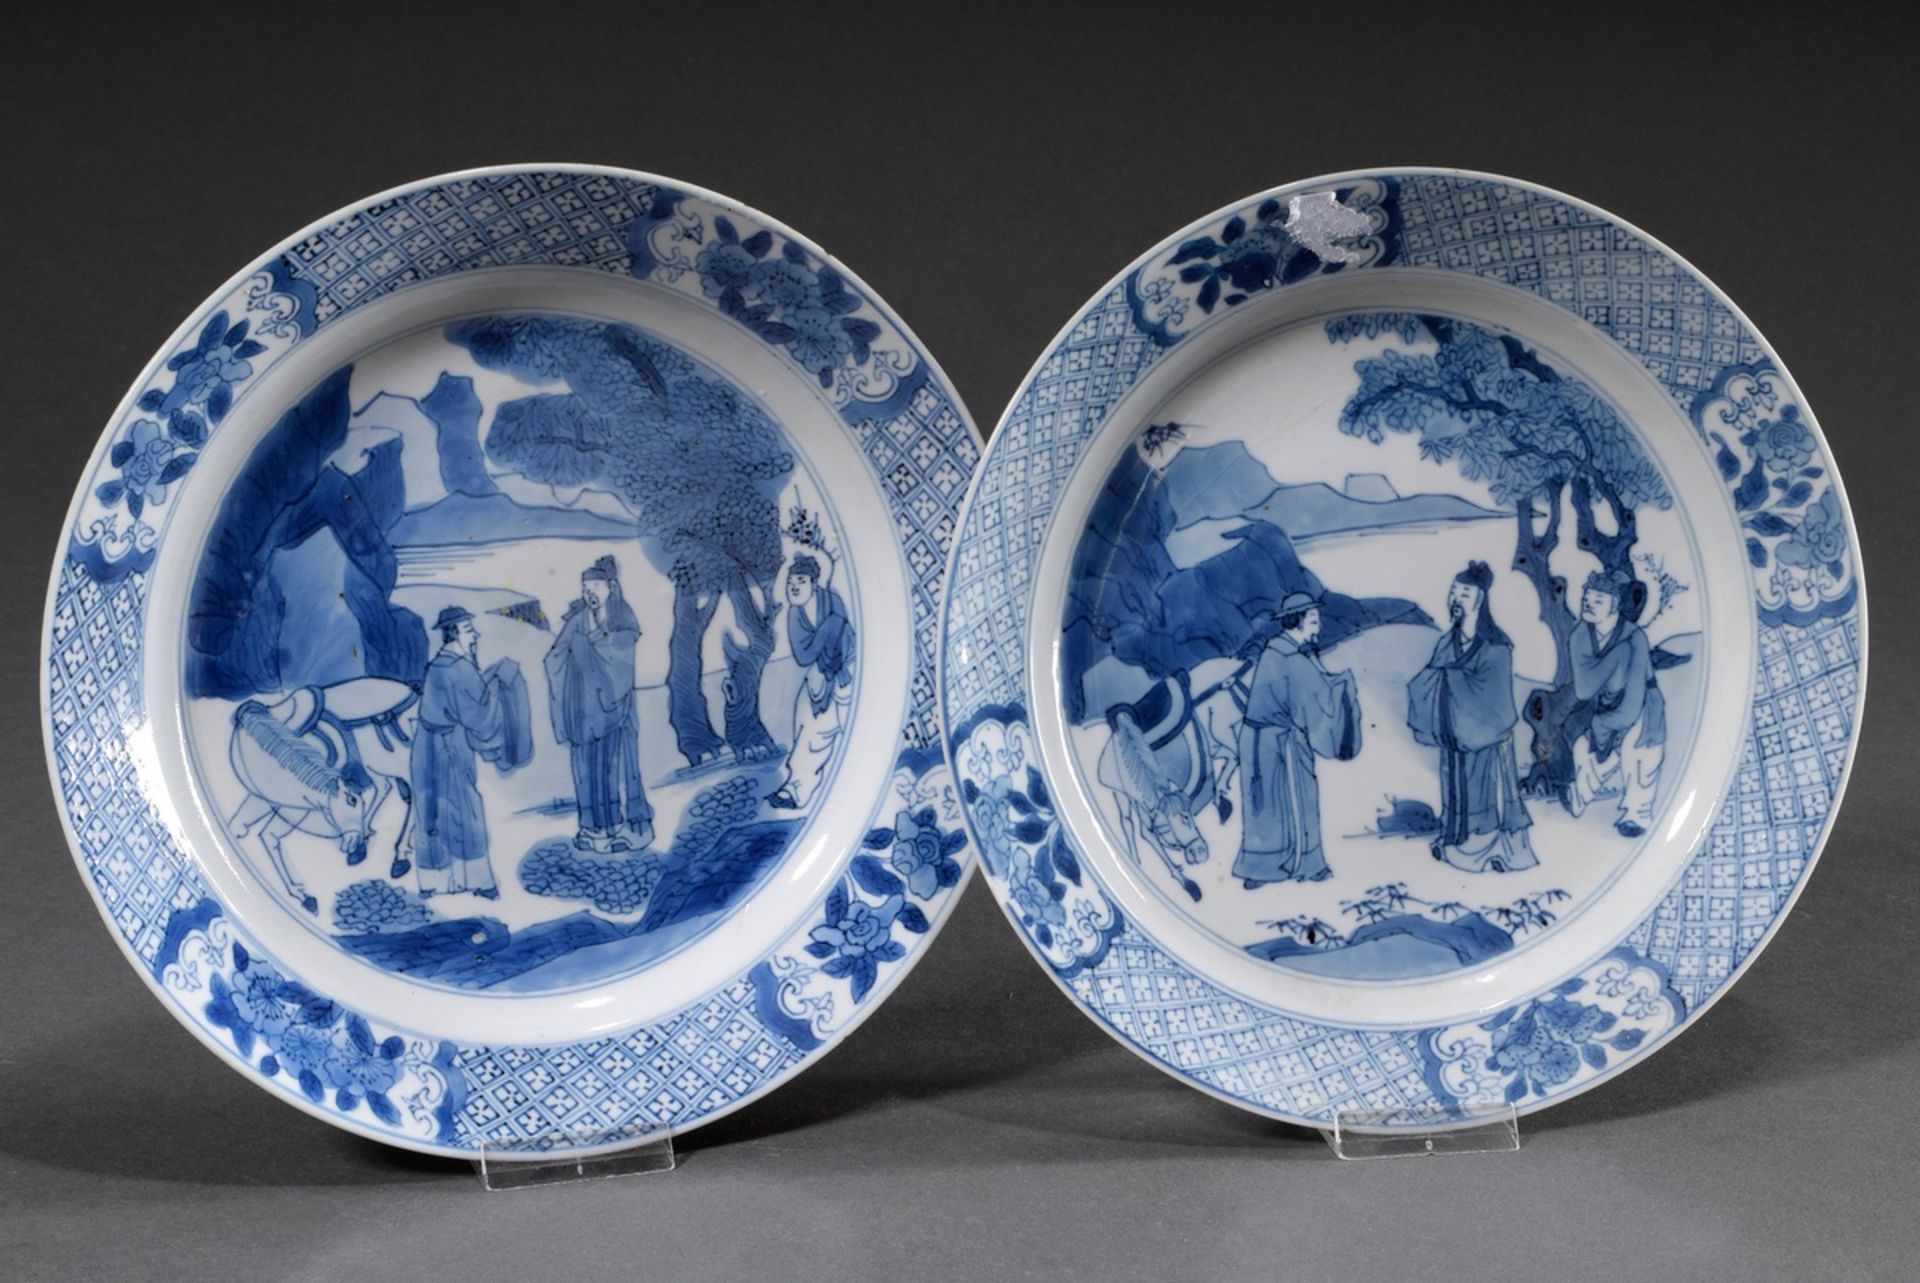 2 plates with blue painting scenes "Daoist sage on the way", 6character Chenghua mark in double rin